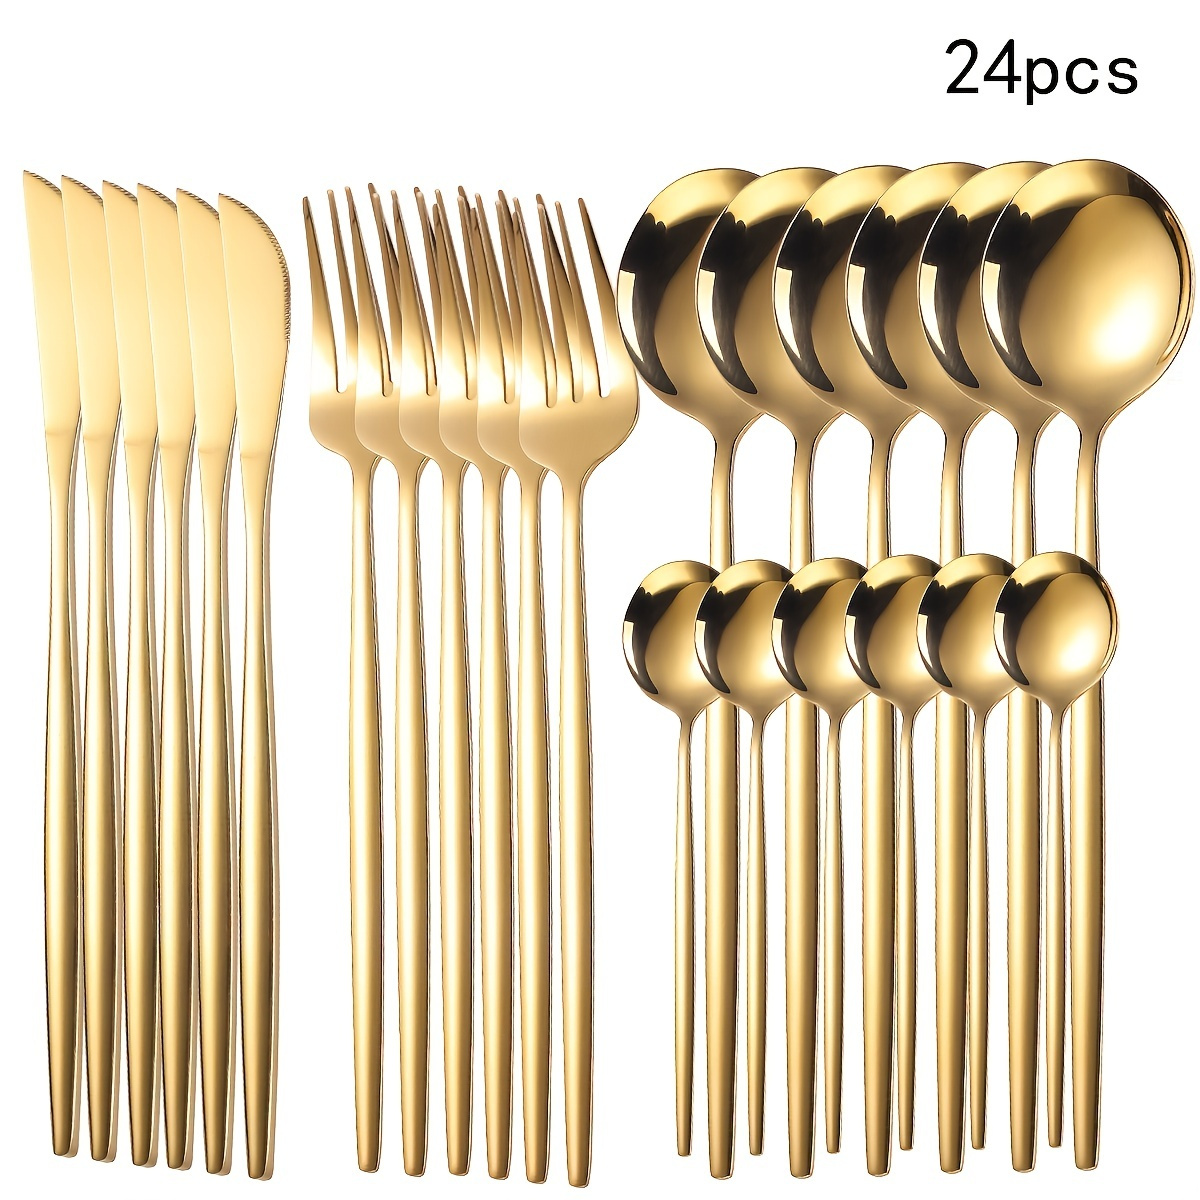 

24pcs Stainless Steel Knife And Fork Portuguese Cutlery Set Golden Creative Western Steak Knife, Fork And Spoon Suitable For Family Restaurant, Dishwasher Safe Eid Al-adha Mubarak